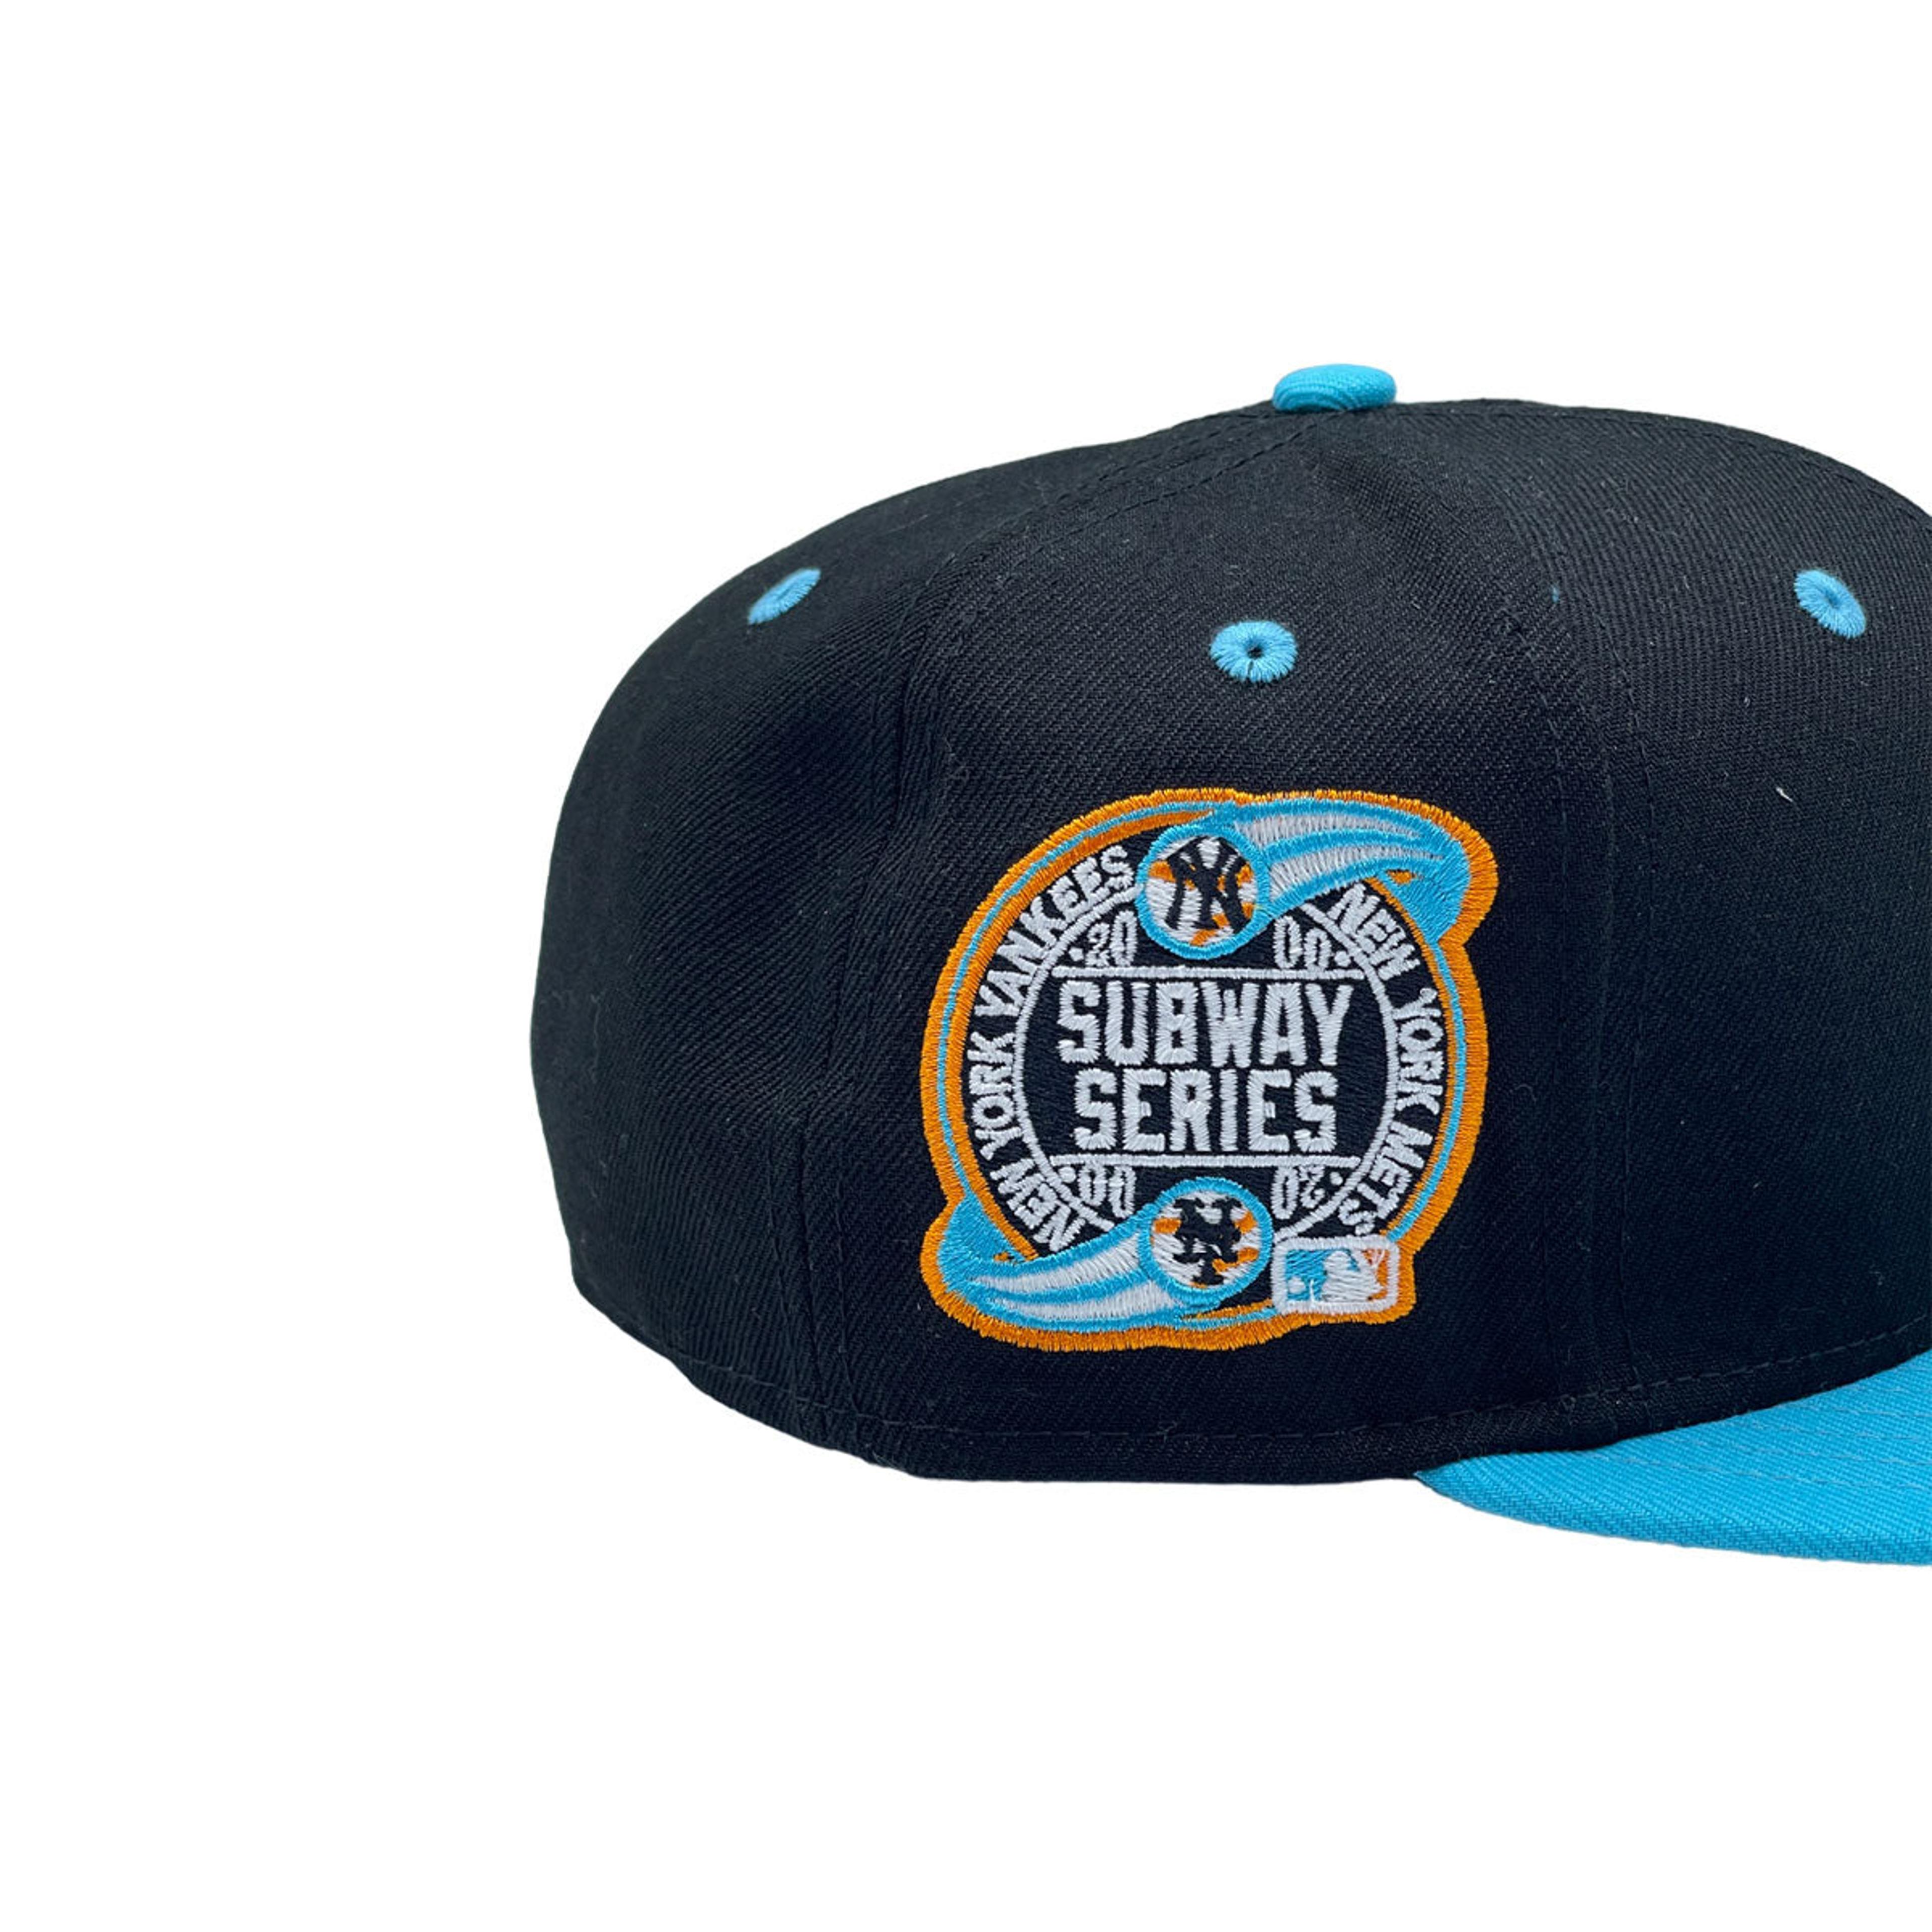 Alternate View 5 of New Era 59Fifty New York Yankees 2000 Subway Series Patch Fitted